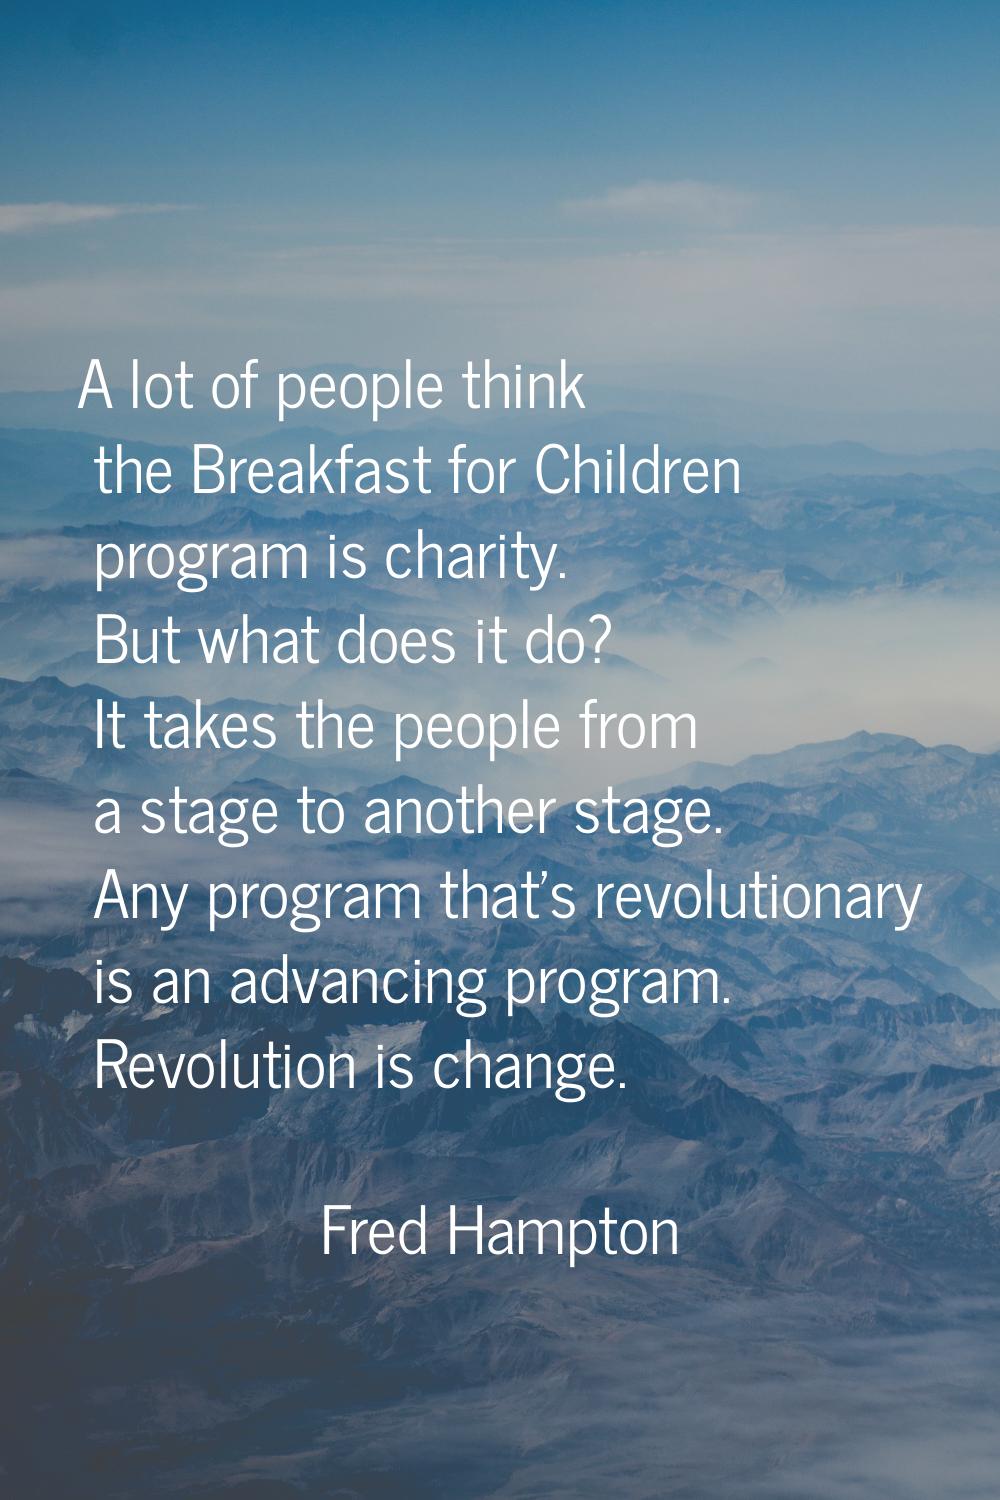 A lot of people think the Breakfast for Children program is charity. But what does it do? It takes 